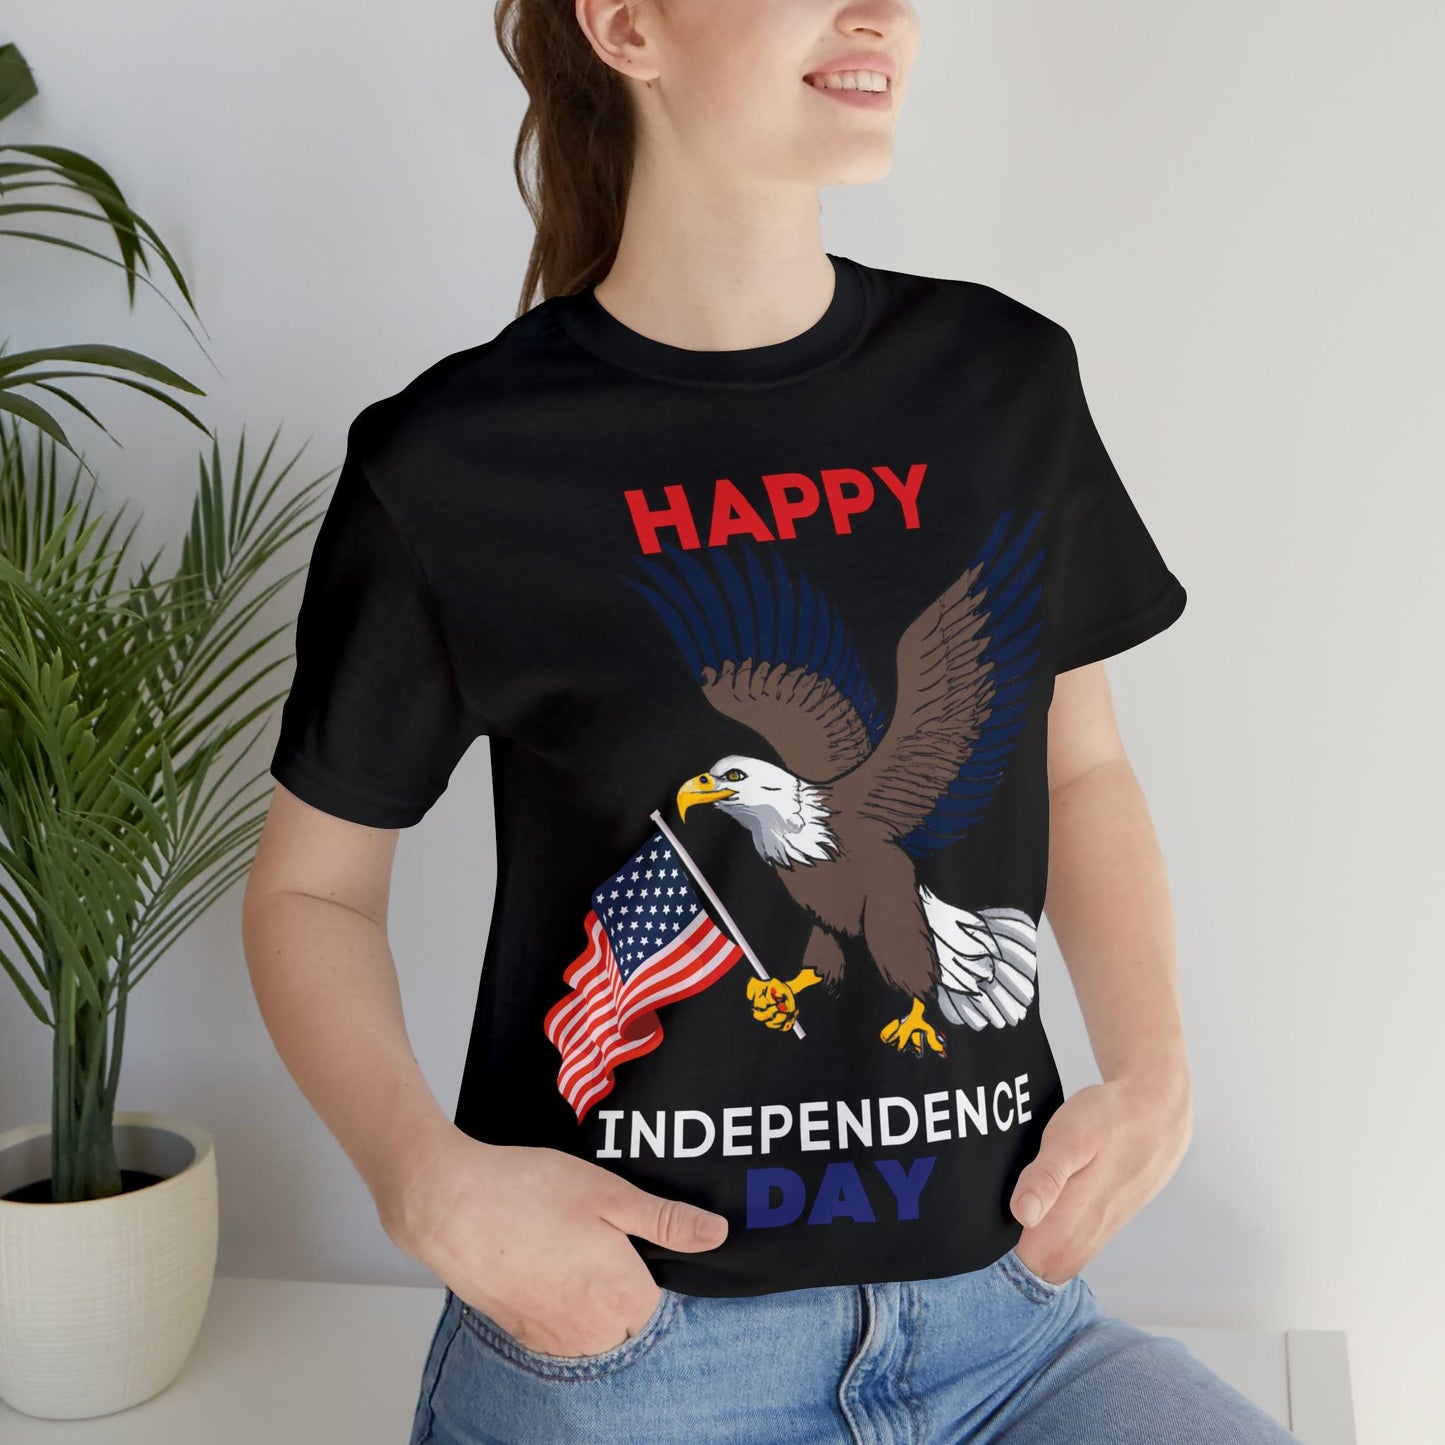 Show Your Patriotic Spirit with Happy Independence Day Shirts for Women and Men: 4th of July, USA Flag, Fireworks, Freedom, and More